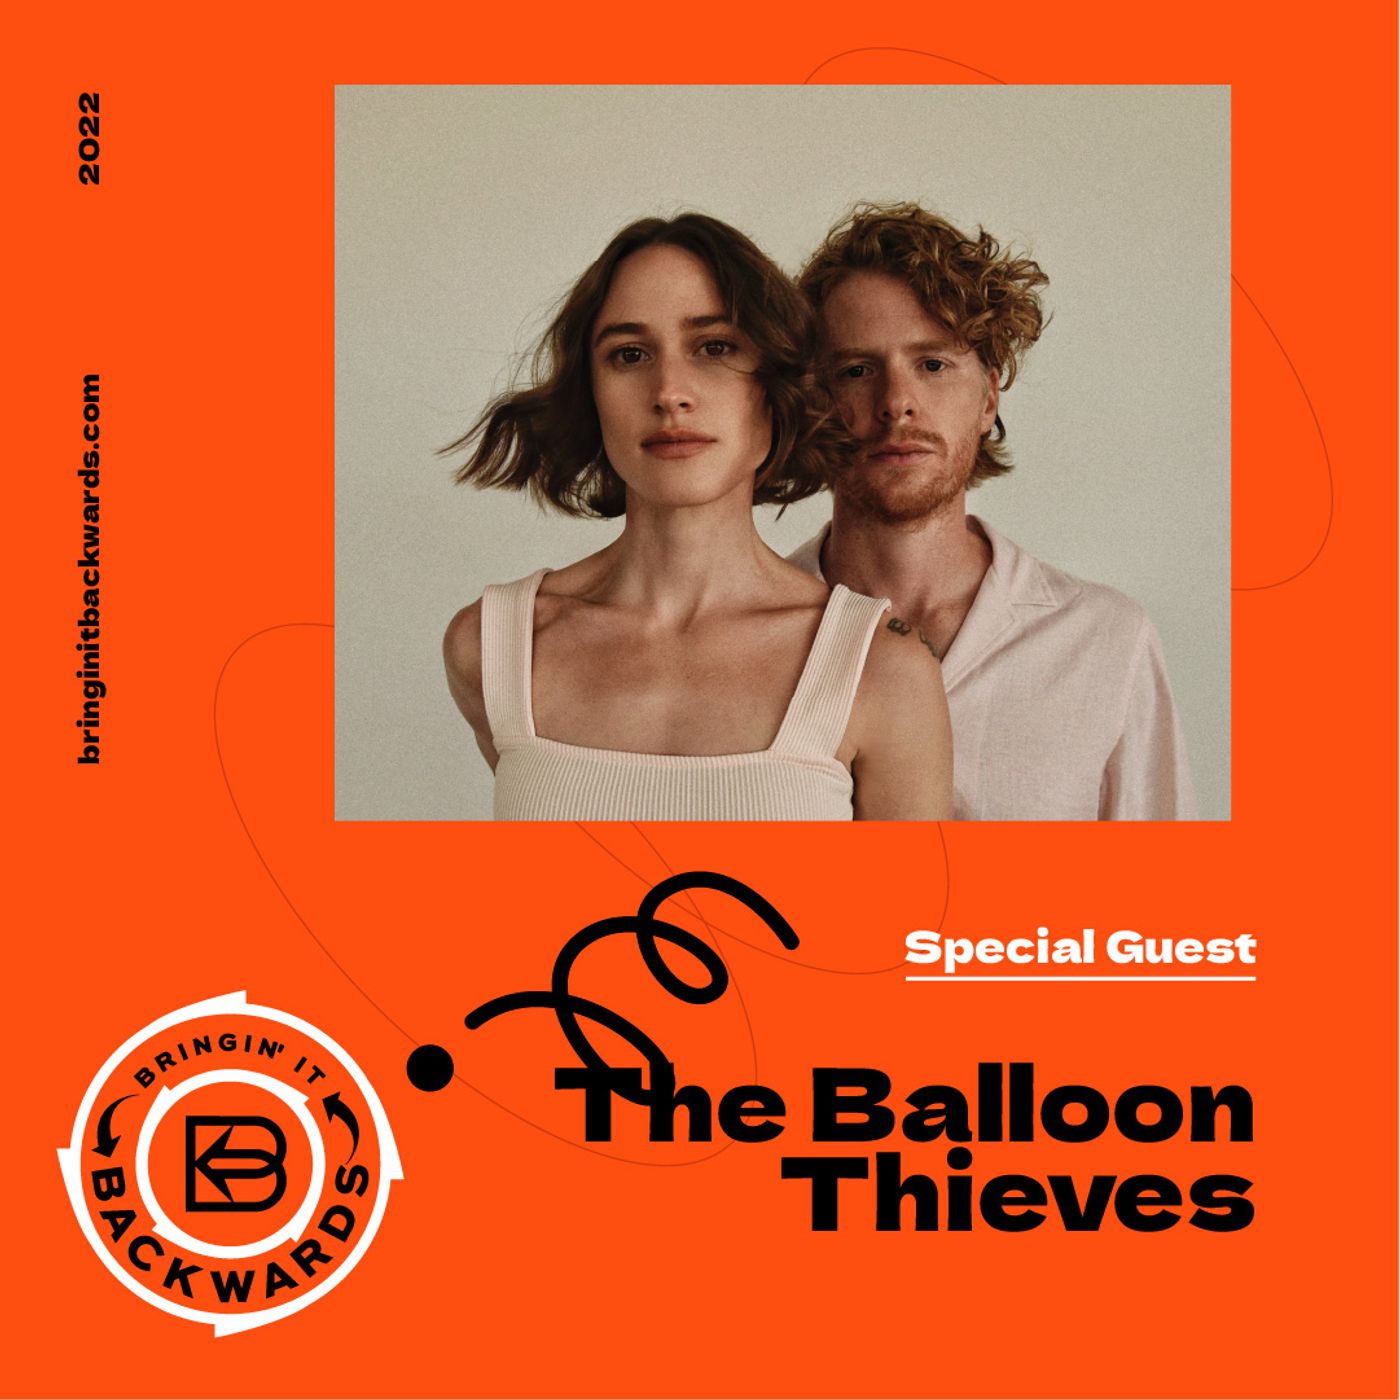 Interview with The Ballroom Thieves Image